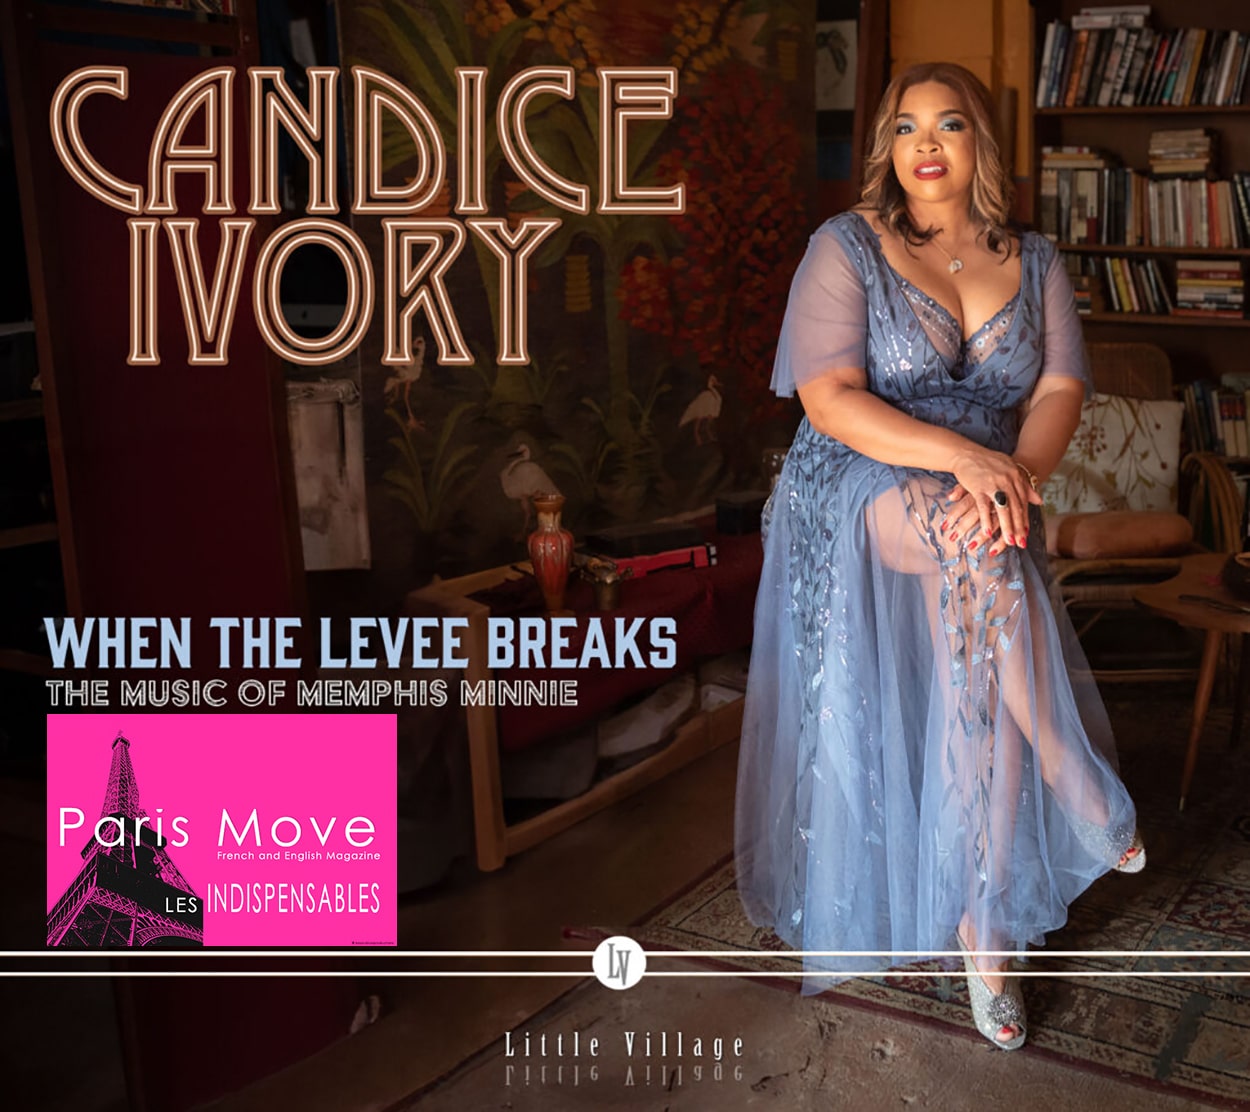 Candice Ivory - When The Levee Breaks – The Music Of Memphis Minnie